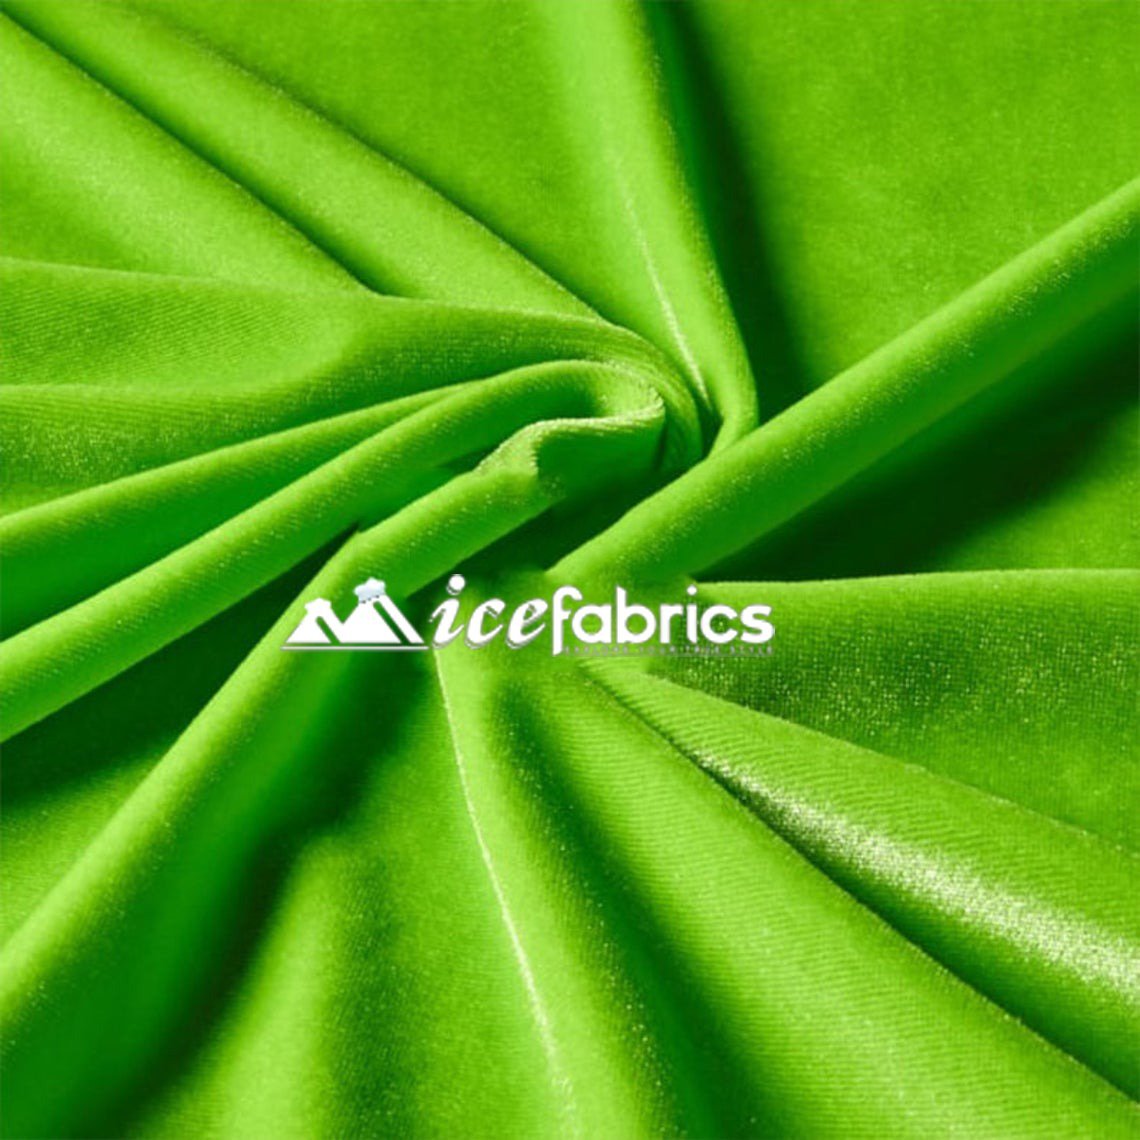 Hight Quality Stretch Velvet Fabric By The Roll (20 yards) Wholesale FabricVelvet FabricICE FABRICSICE FABRICSLimeBy The Roll (60" Wide)Hight Quality Stretch Velvet Fabric By The Roll (20 yards) Wholesale Fabric ICE FABRICS Lime